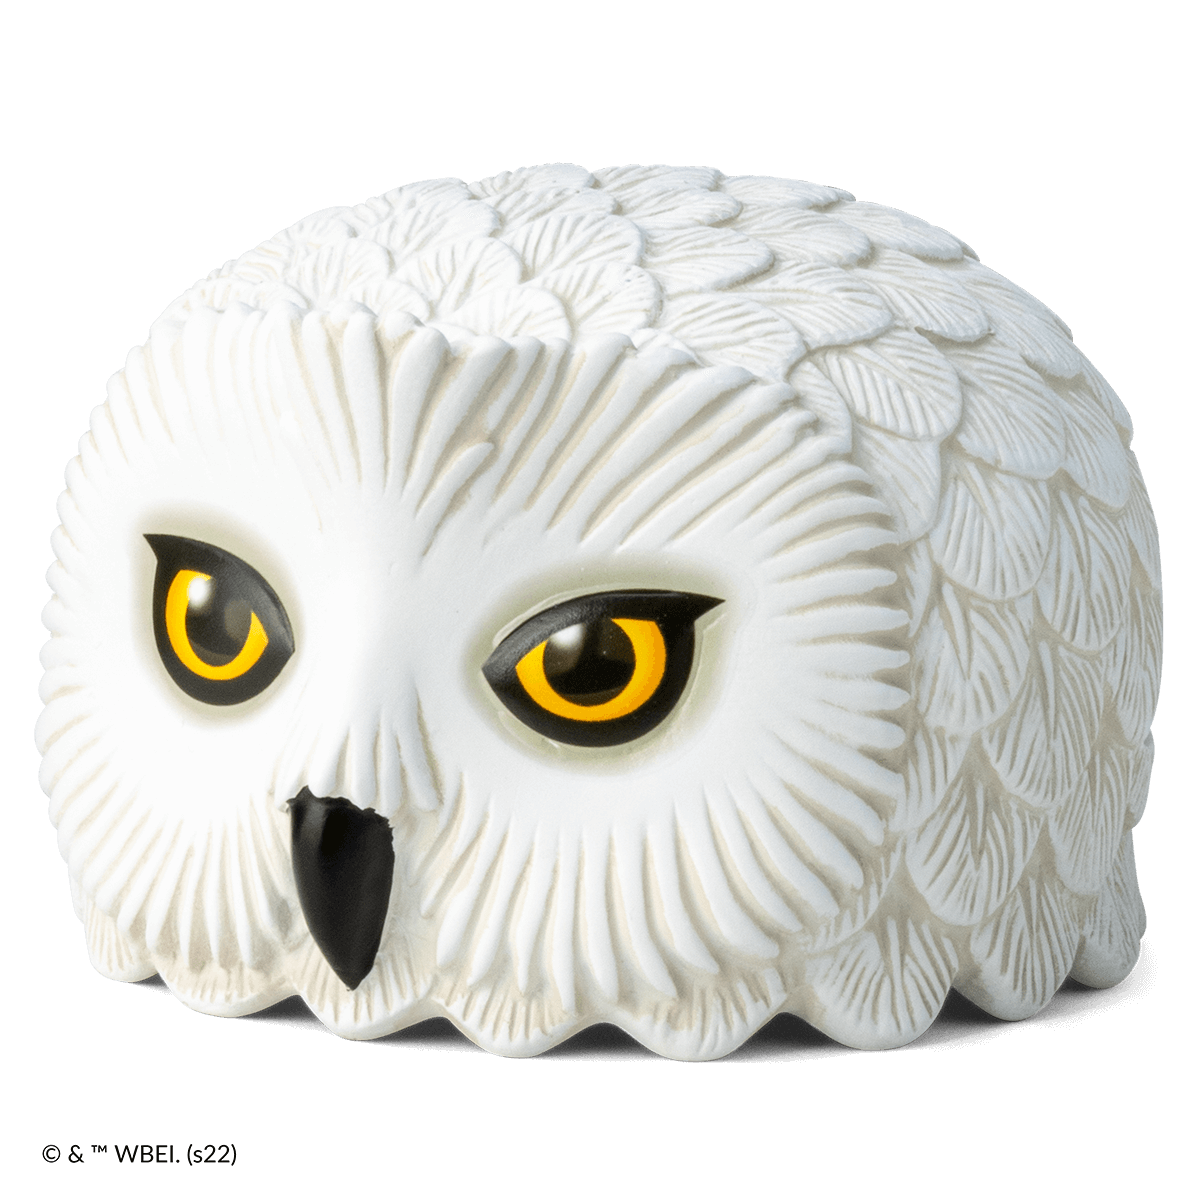 Introducing the Magical Hedwig Owl Scentsy Plug In Warmer 2024